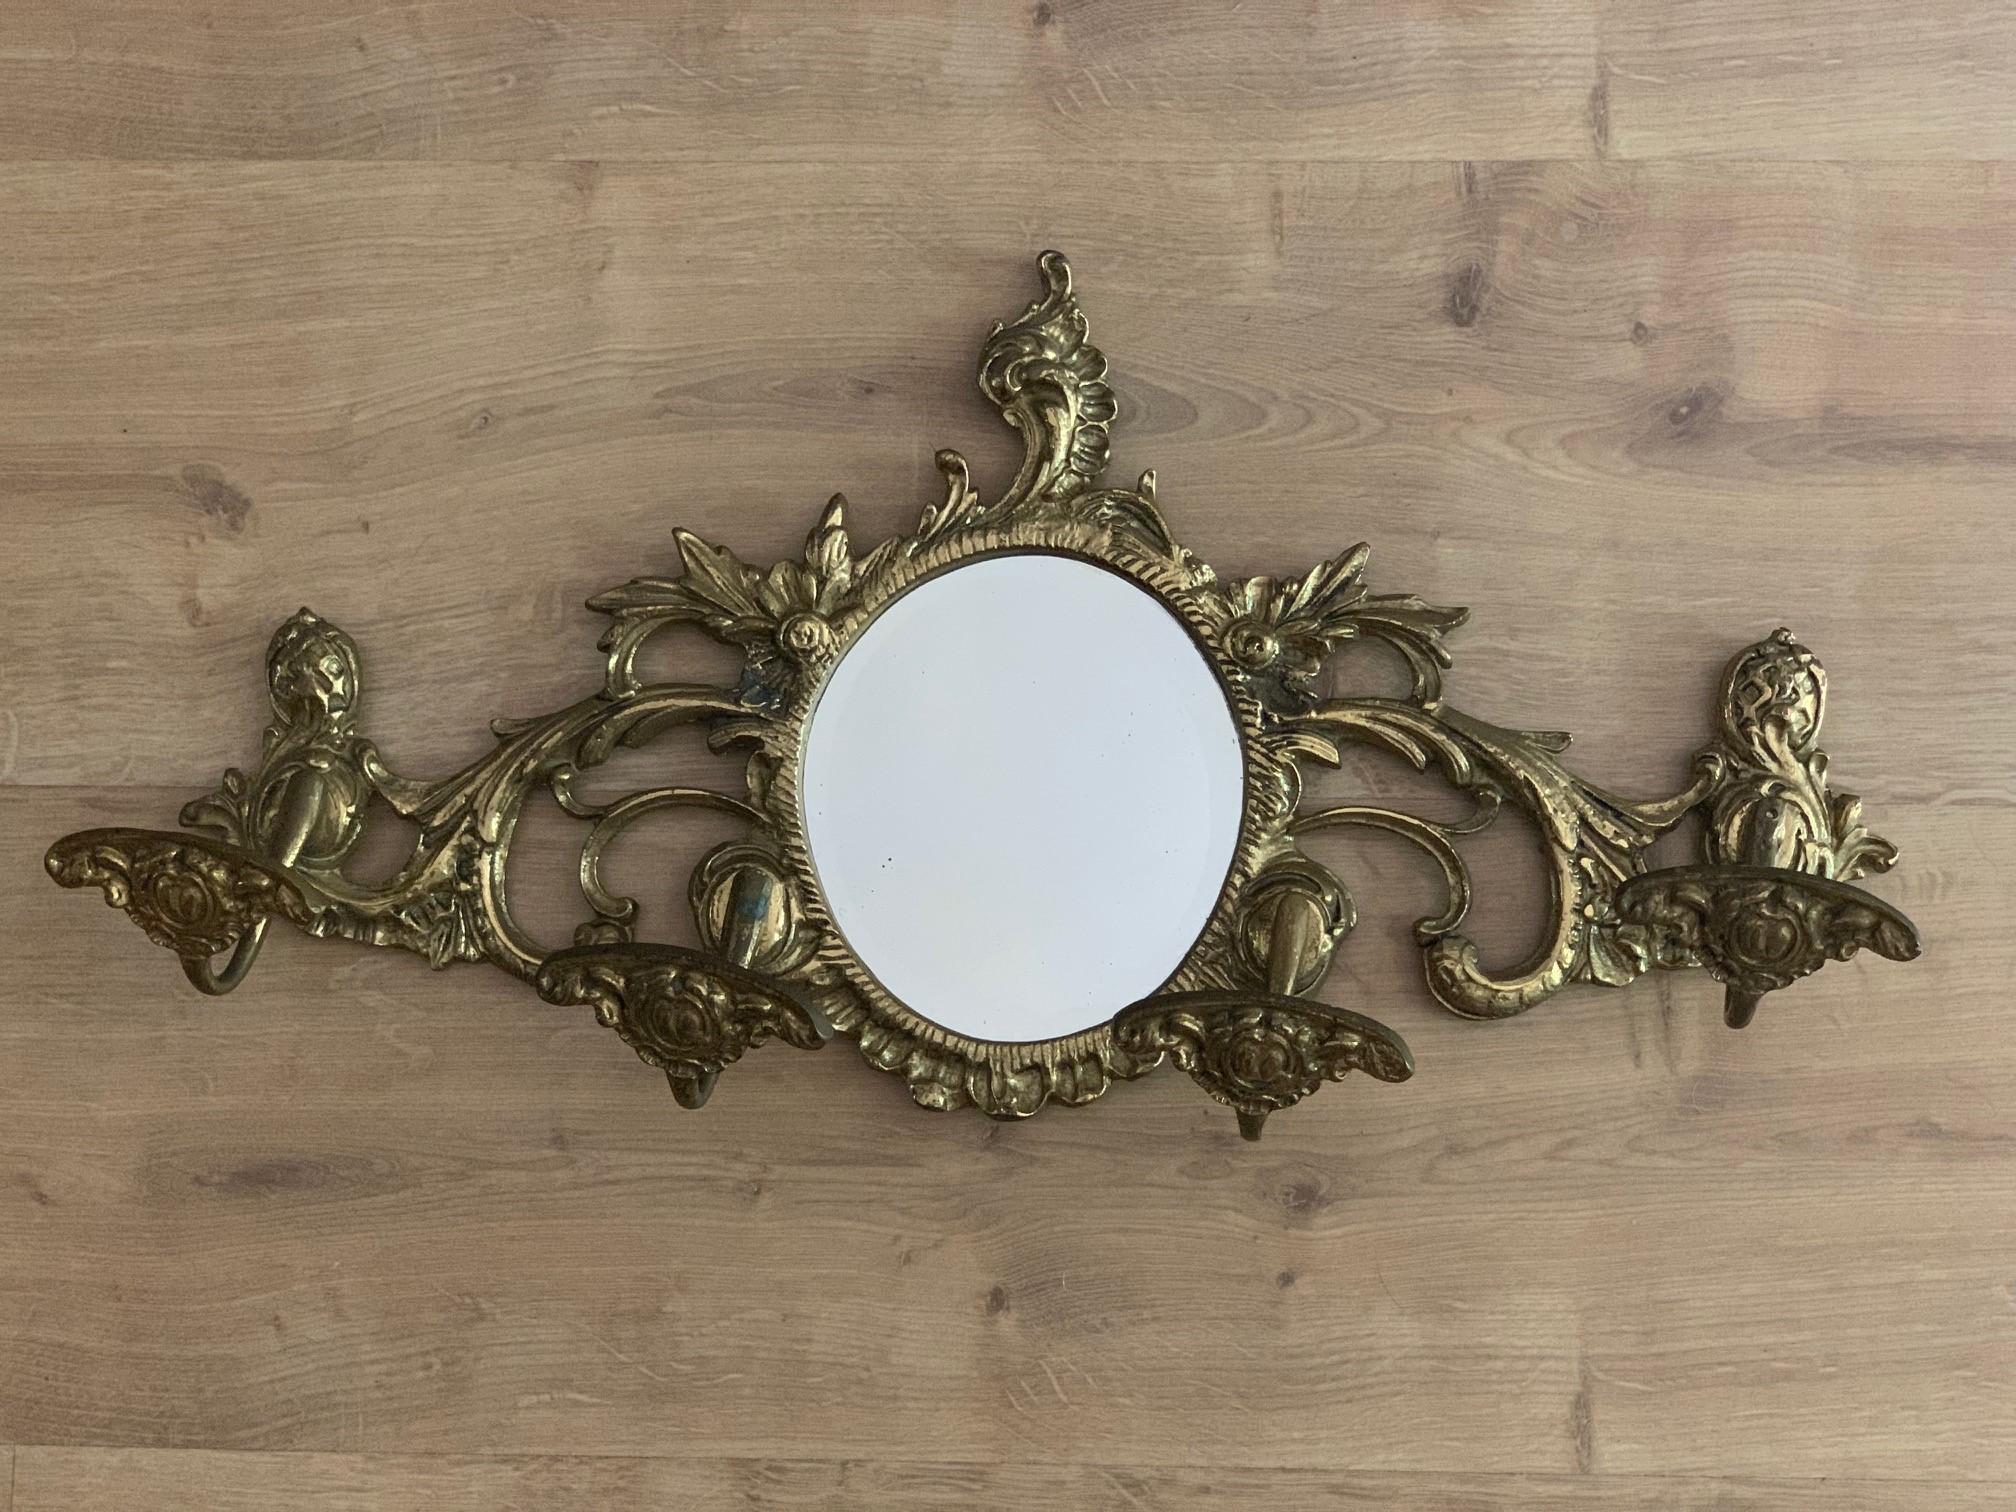 19th Century French Bronze Wall Mounted Coat Rack with Mirror 2